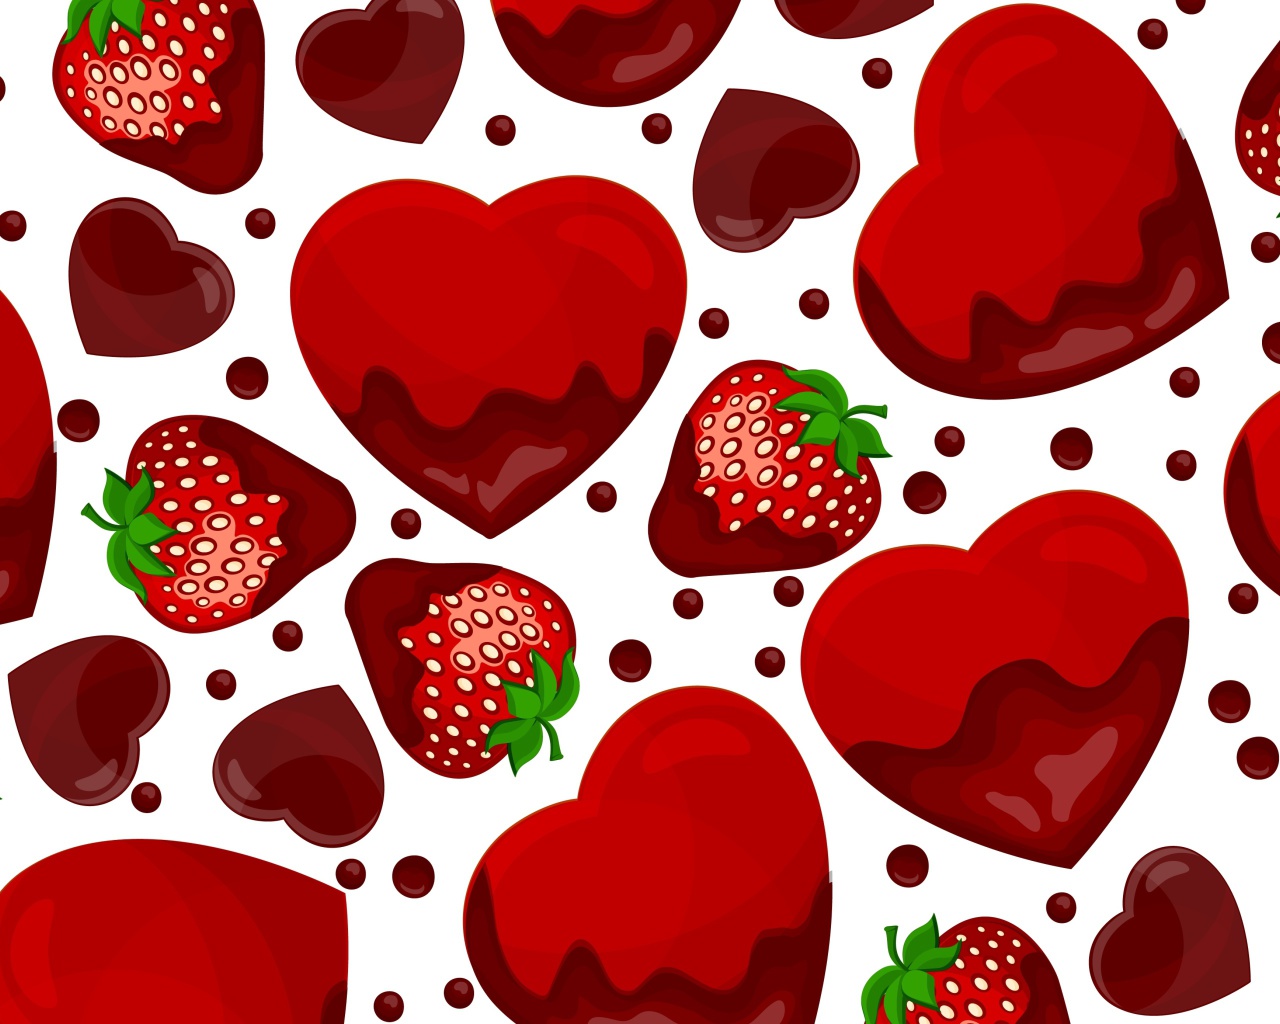 Strawberry and Hearts wallpaper 1280x1024